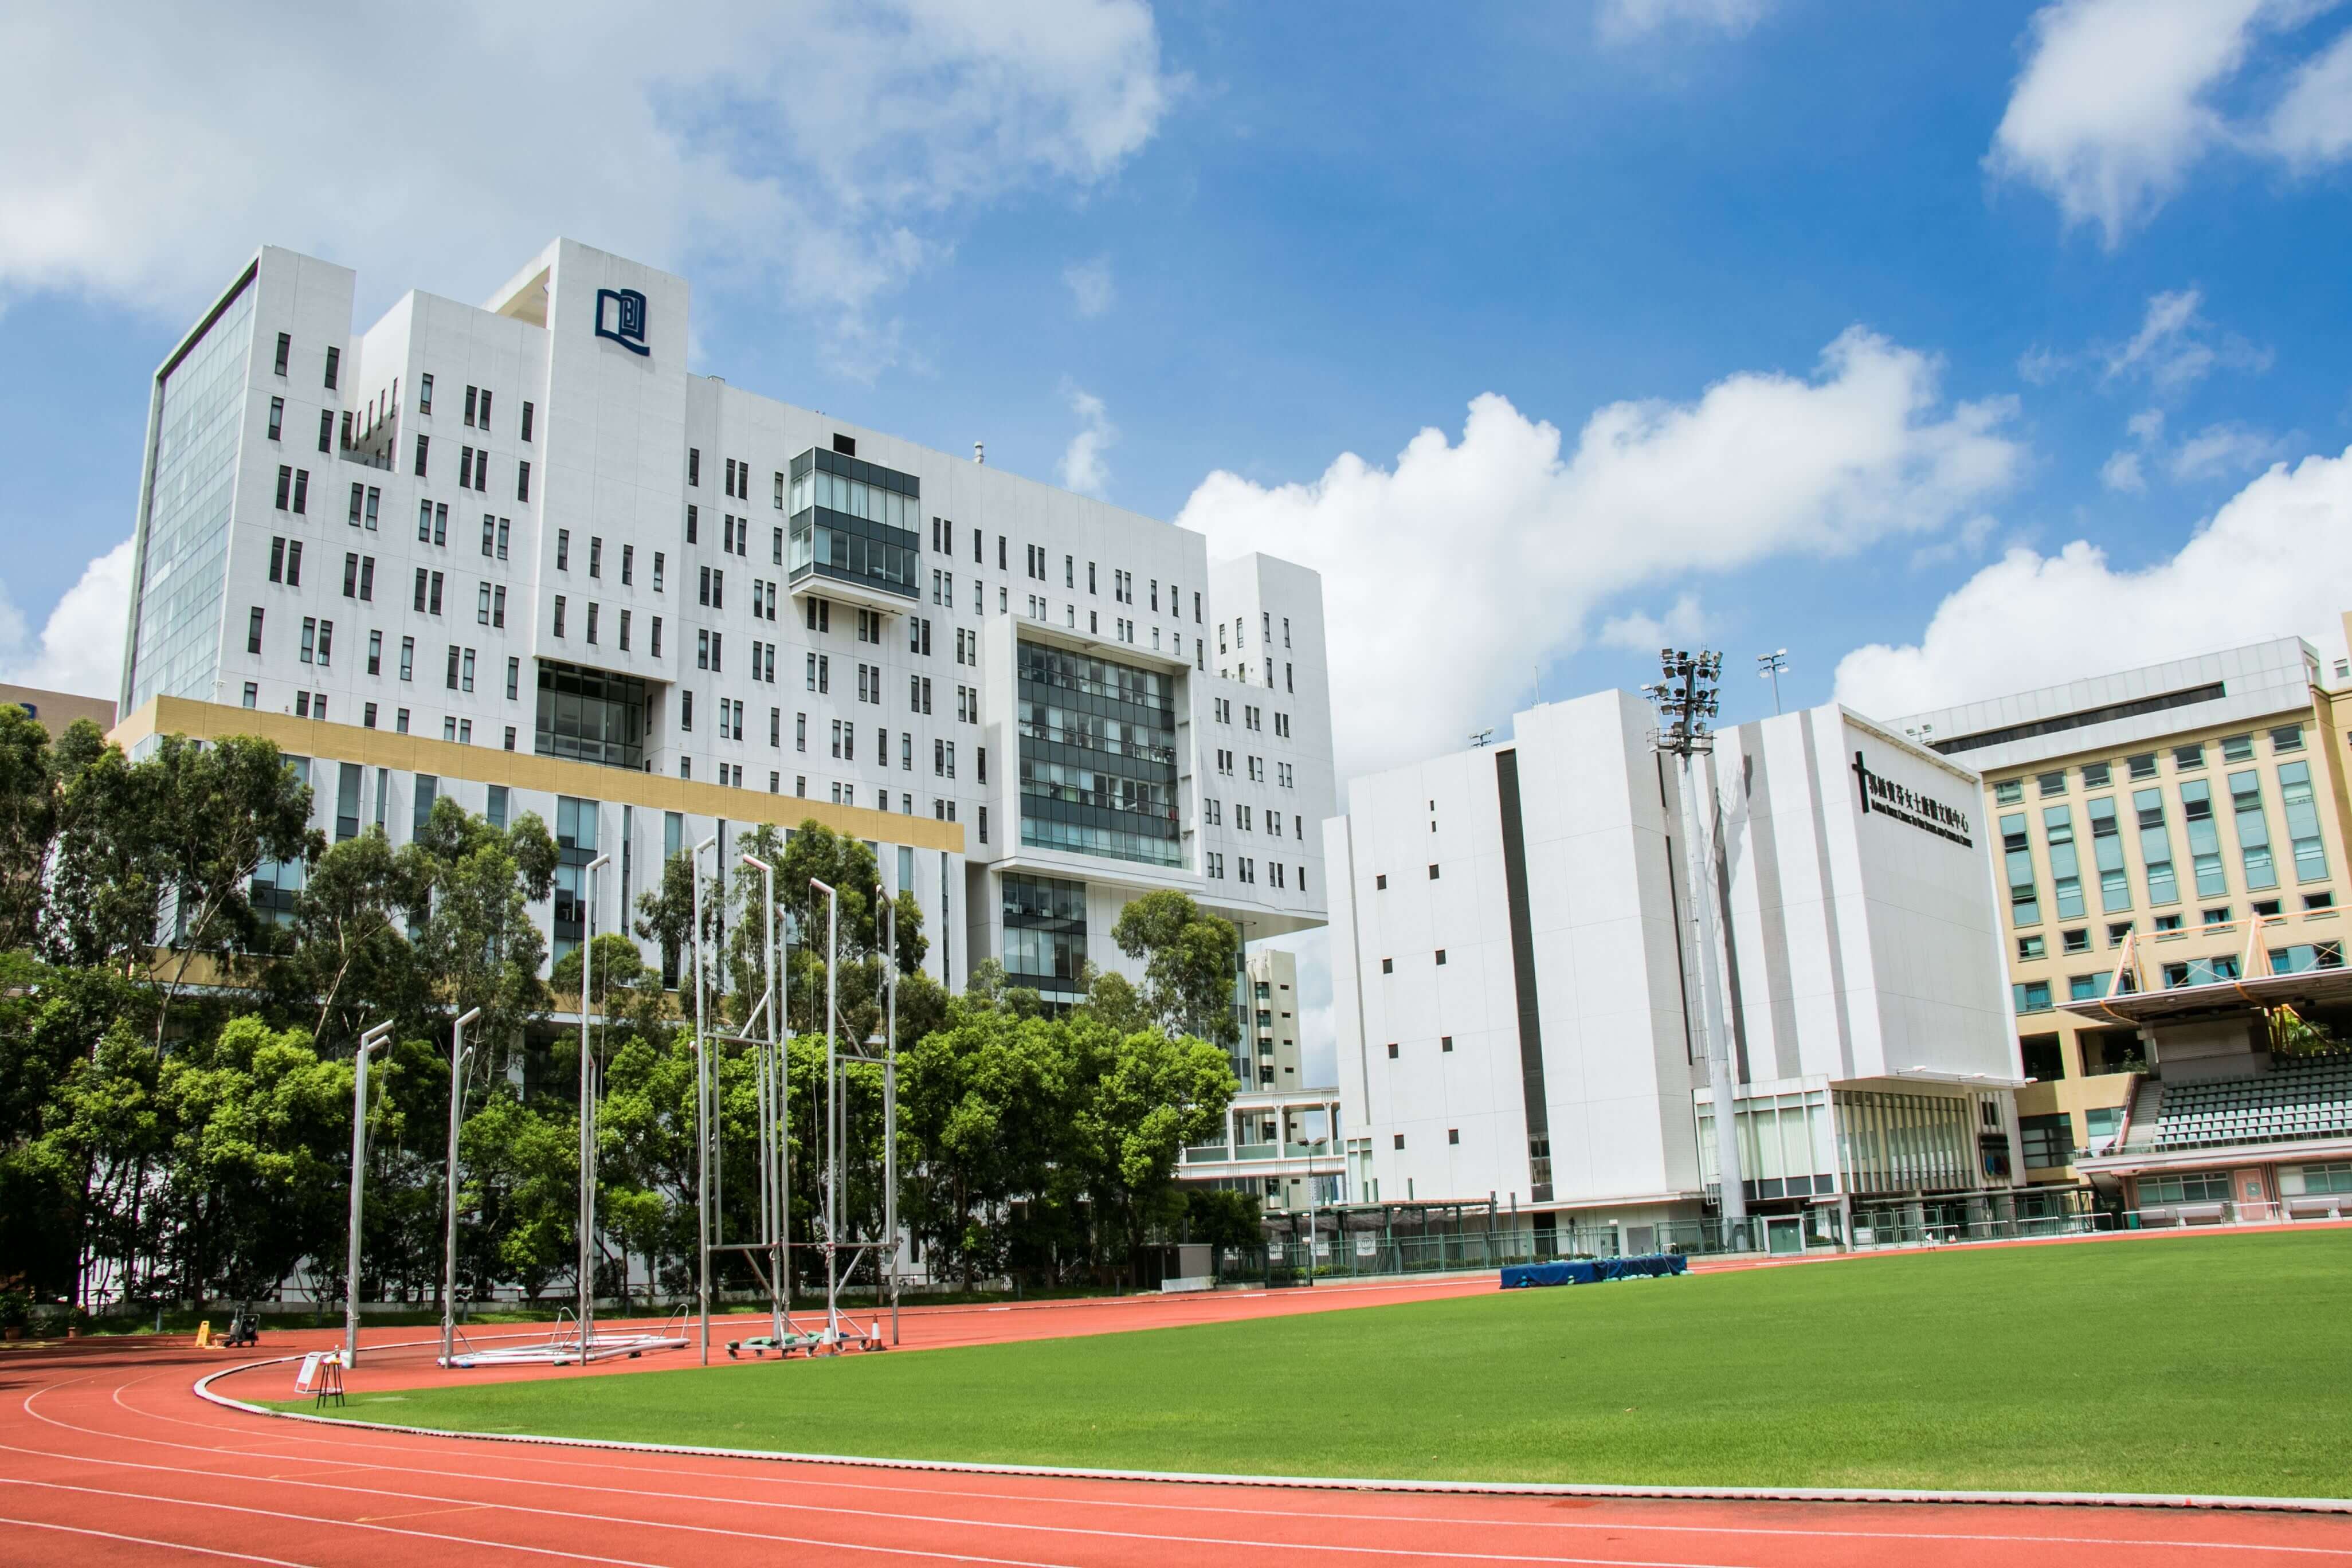 Scholarships and support abound at HKBU School of Business